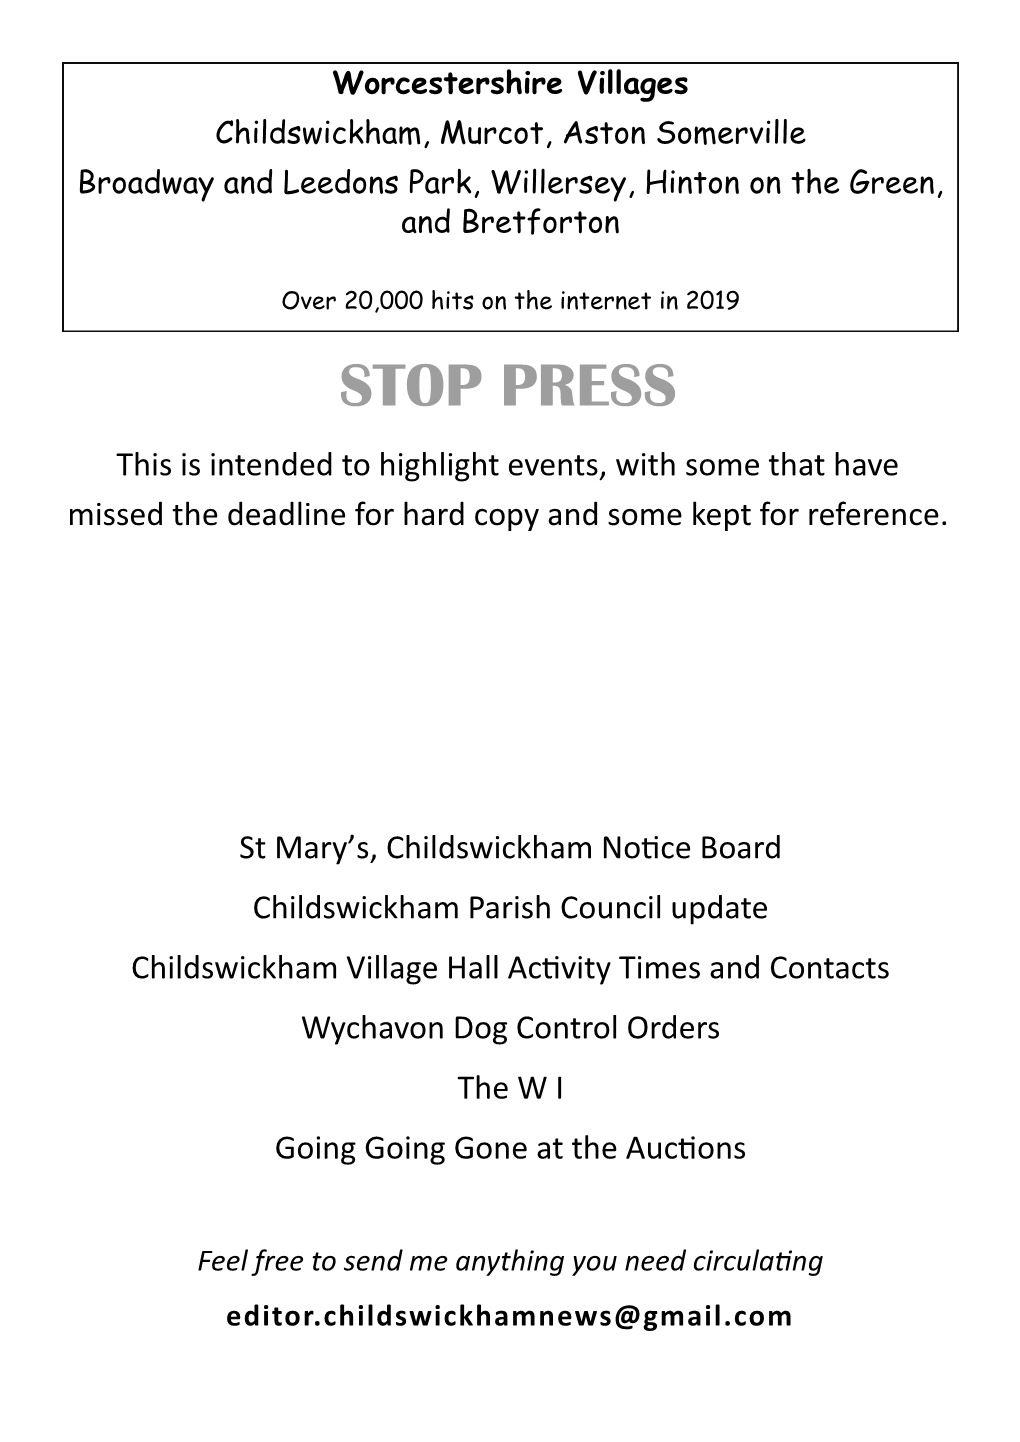 STOP PRESS This Is Intended to Highlight Events, with Some That Have Missed the Deadline for Hard Copy and Some Kept for Reference